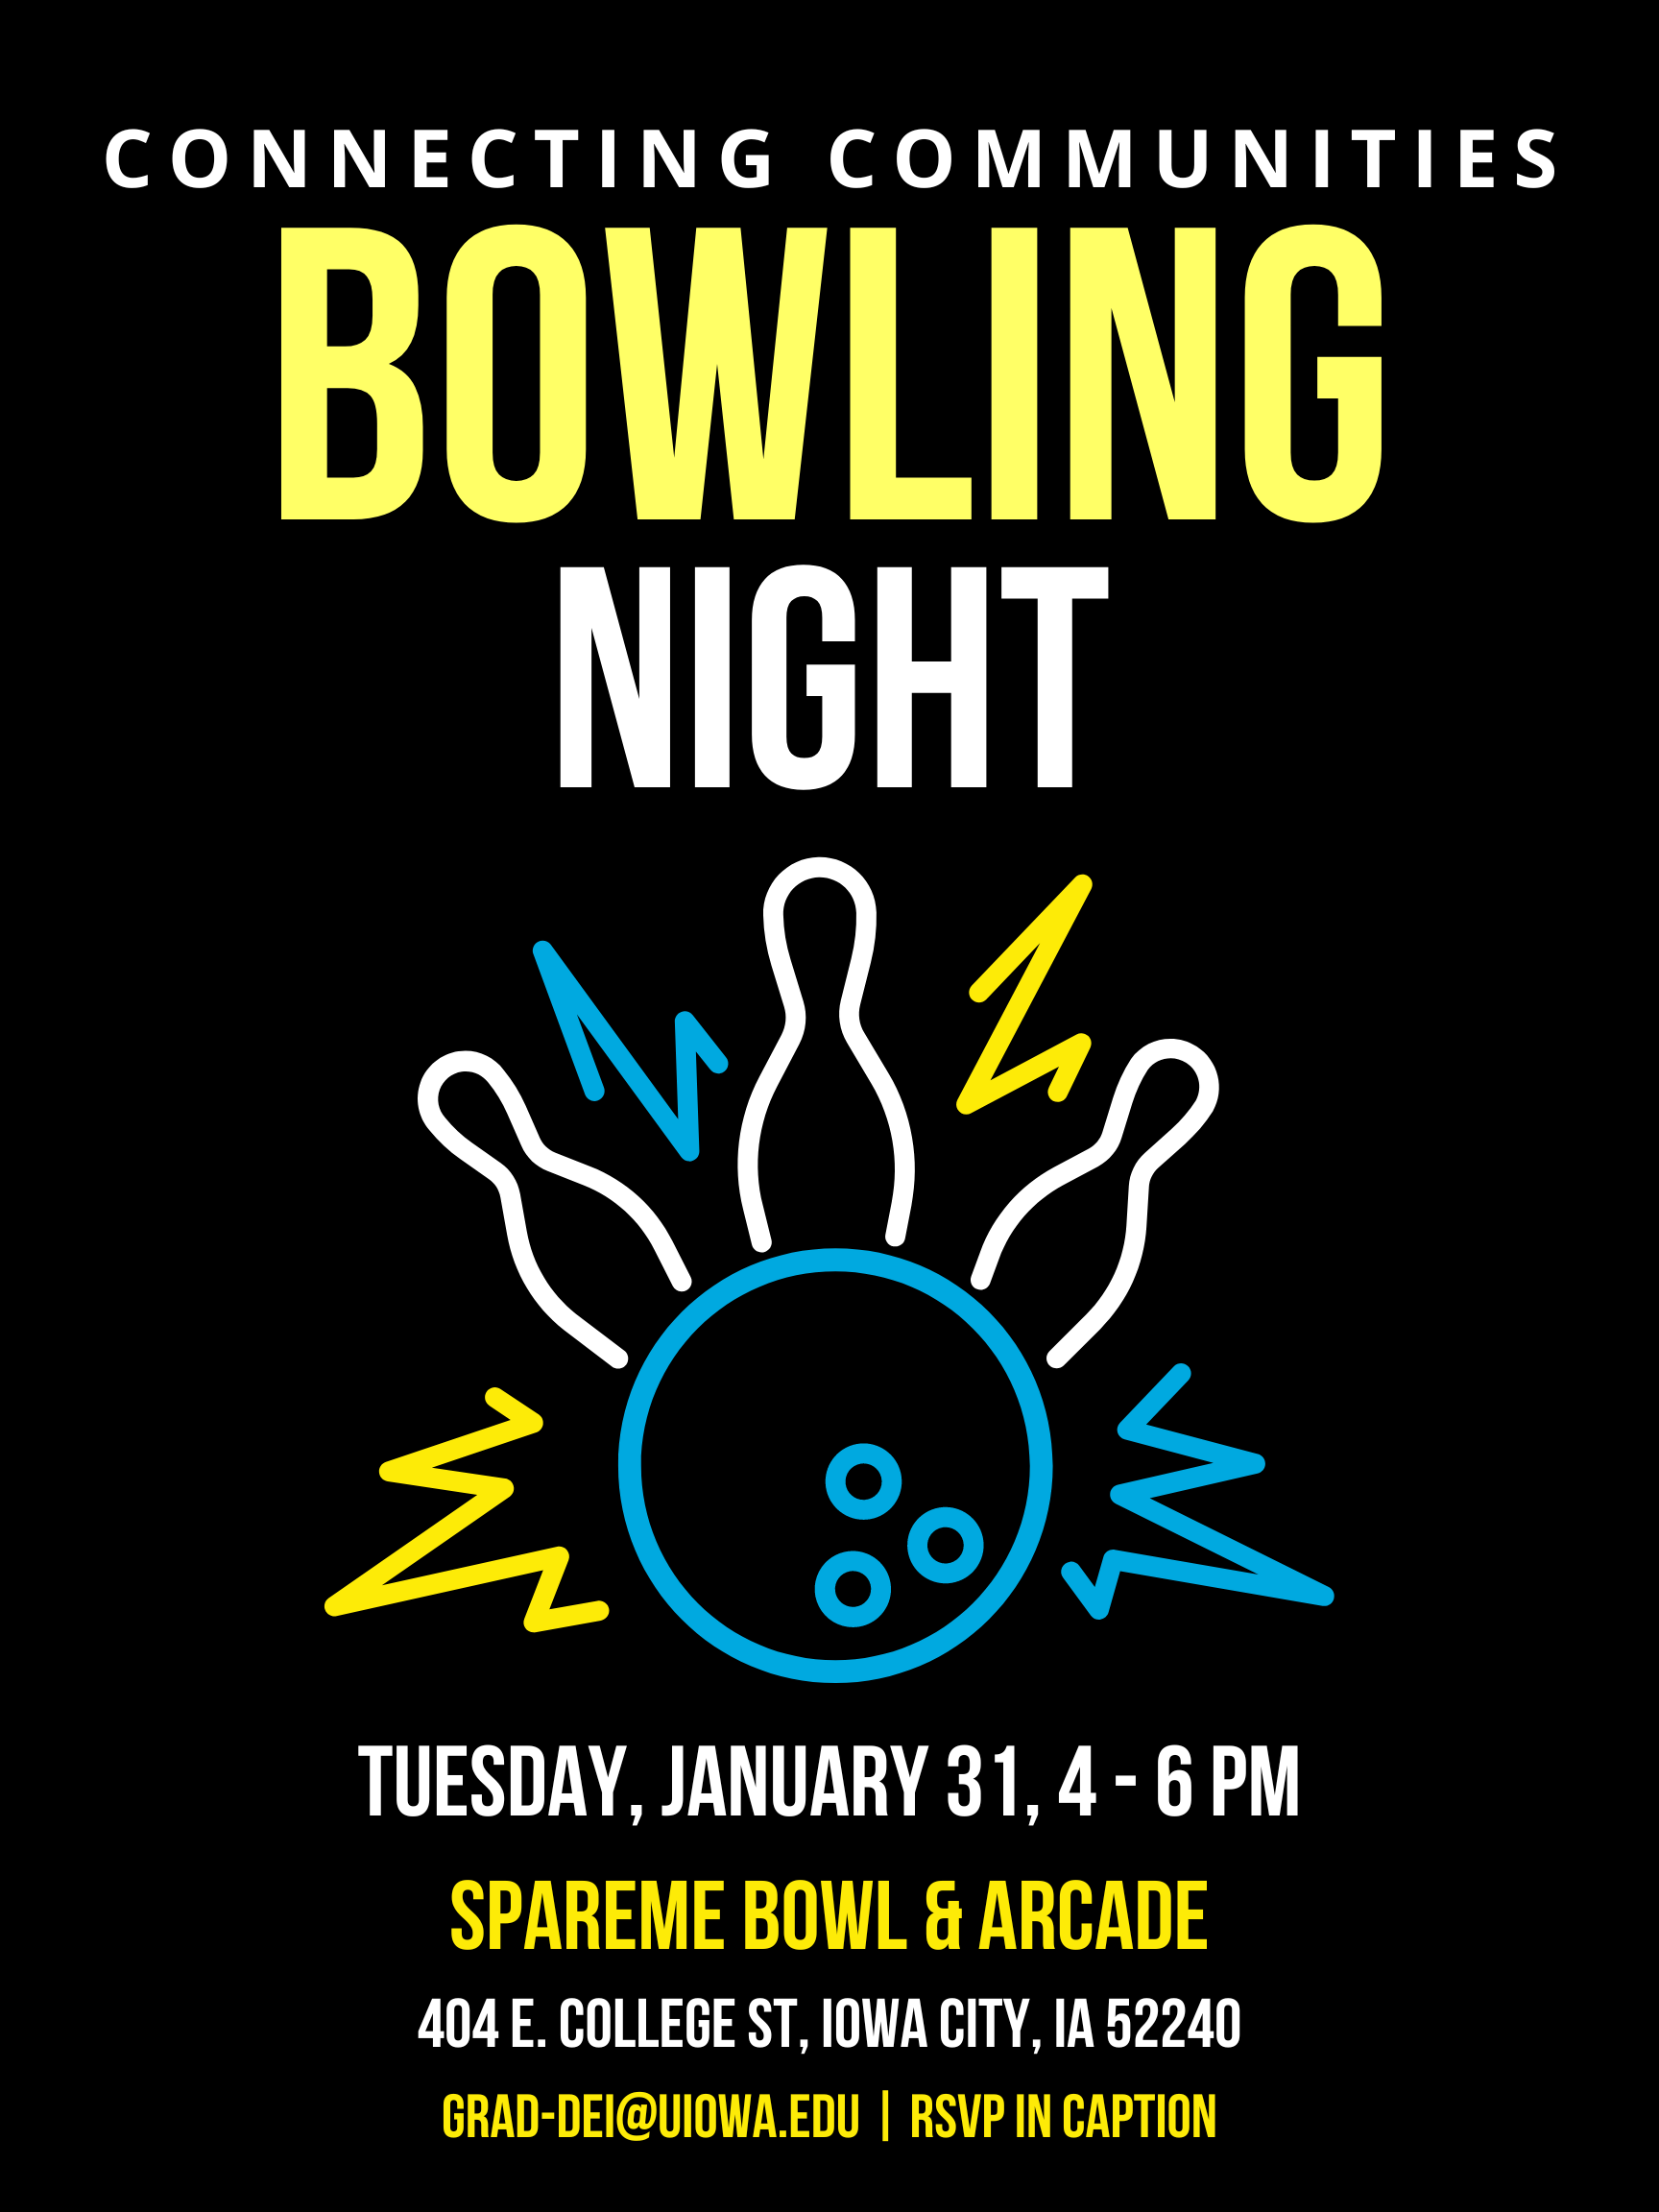 black background with graphic of 3 bowling pins and a bowling ball in the center. Text above and below graphic says "Connecting Communities Bowling Night. Tuesday January 31, 4 - 6 PM, SpareMe Bowl & Arcade, 404 E. College St. Iowa City, IA 52240